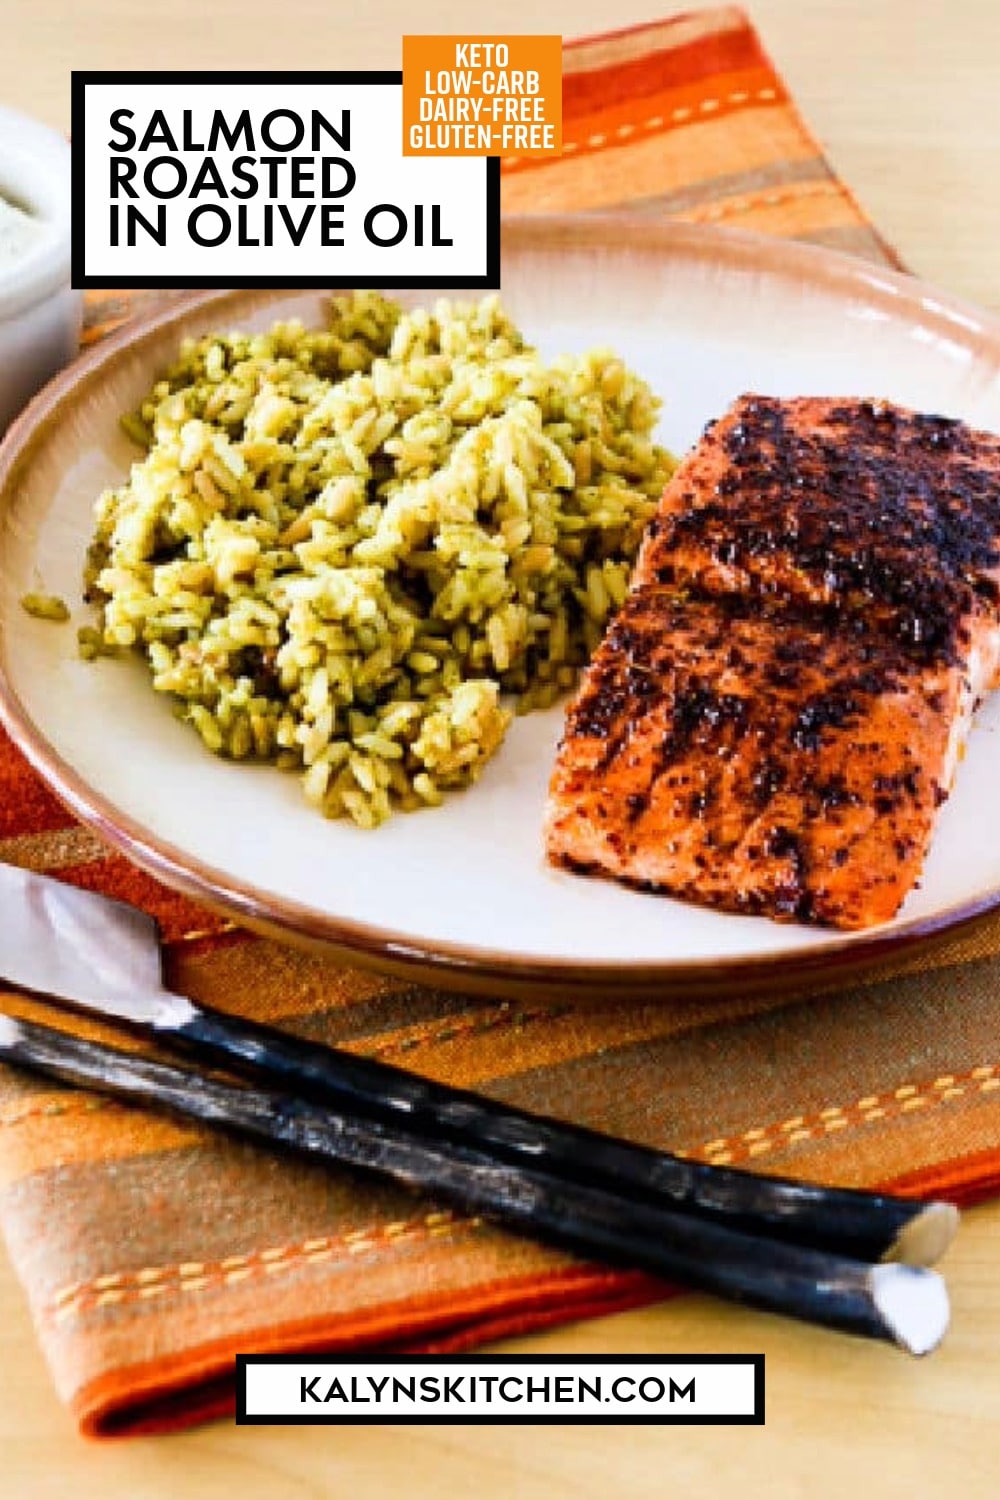 Pinterest image of Salmon Roasted in Olive Oil